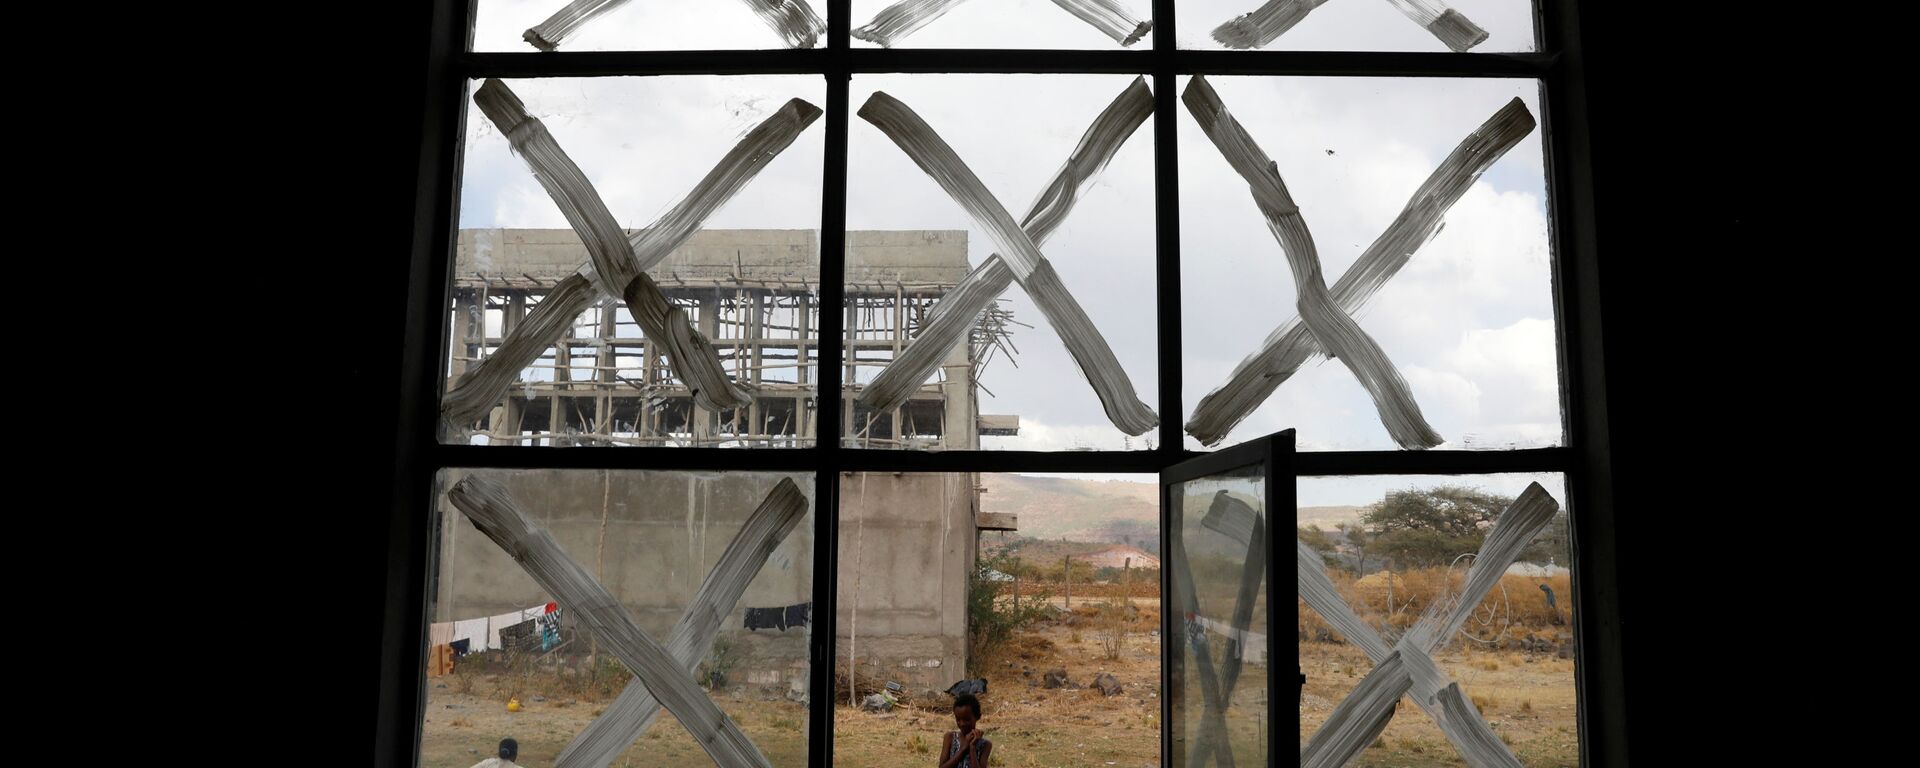 Displaced people are seen at the Shire campus of Aksum University, which was turned into a temporary shelter for people displaced by conflict, in the town of Shire, Tigray region, Ethiopia, March 15, 2021 - Sputnik International, 1920, 11.10.2021